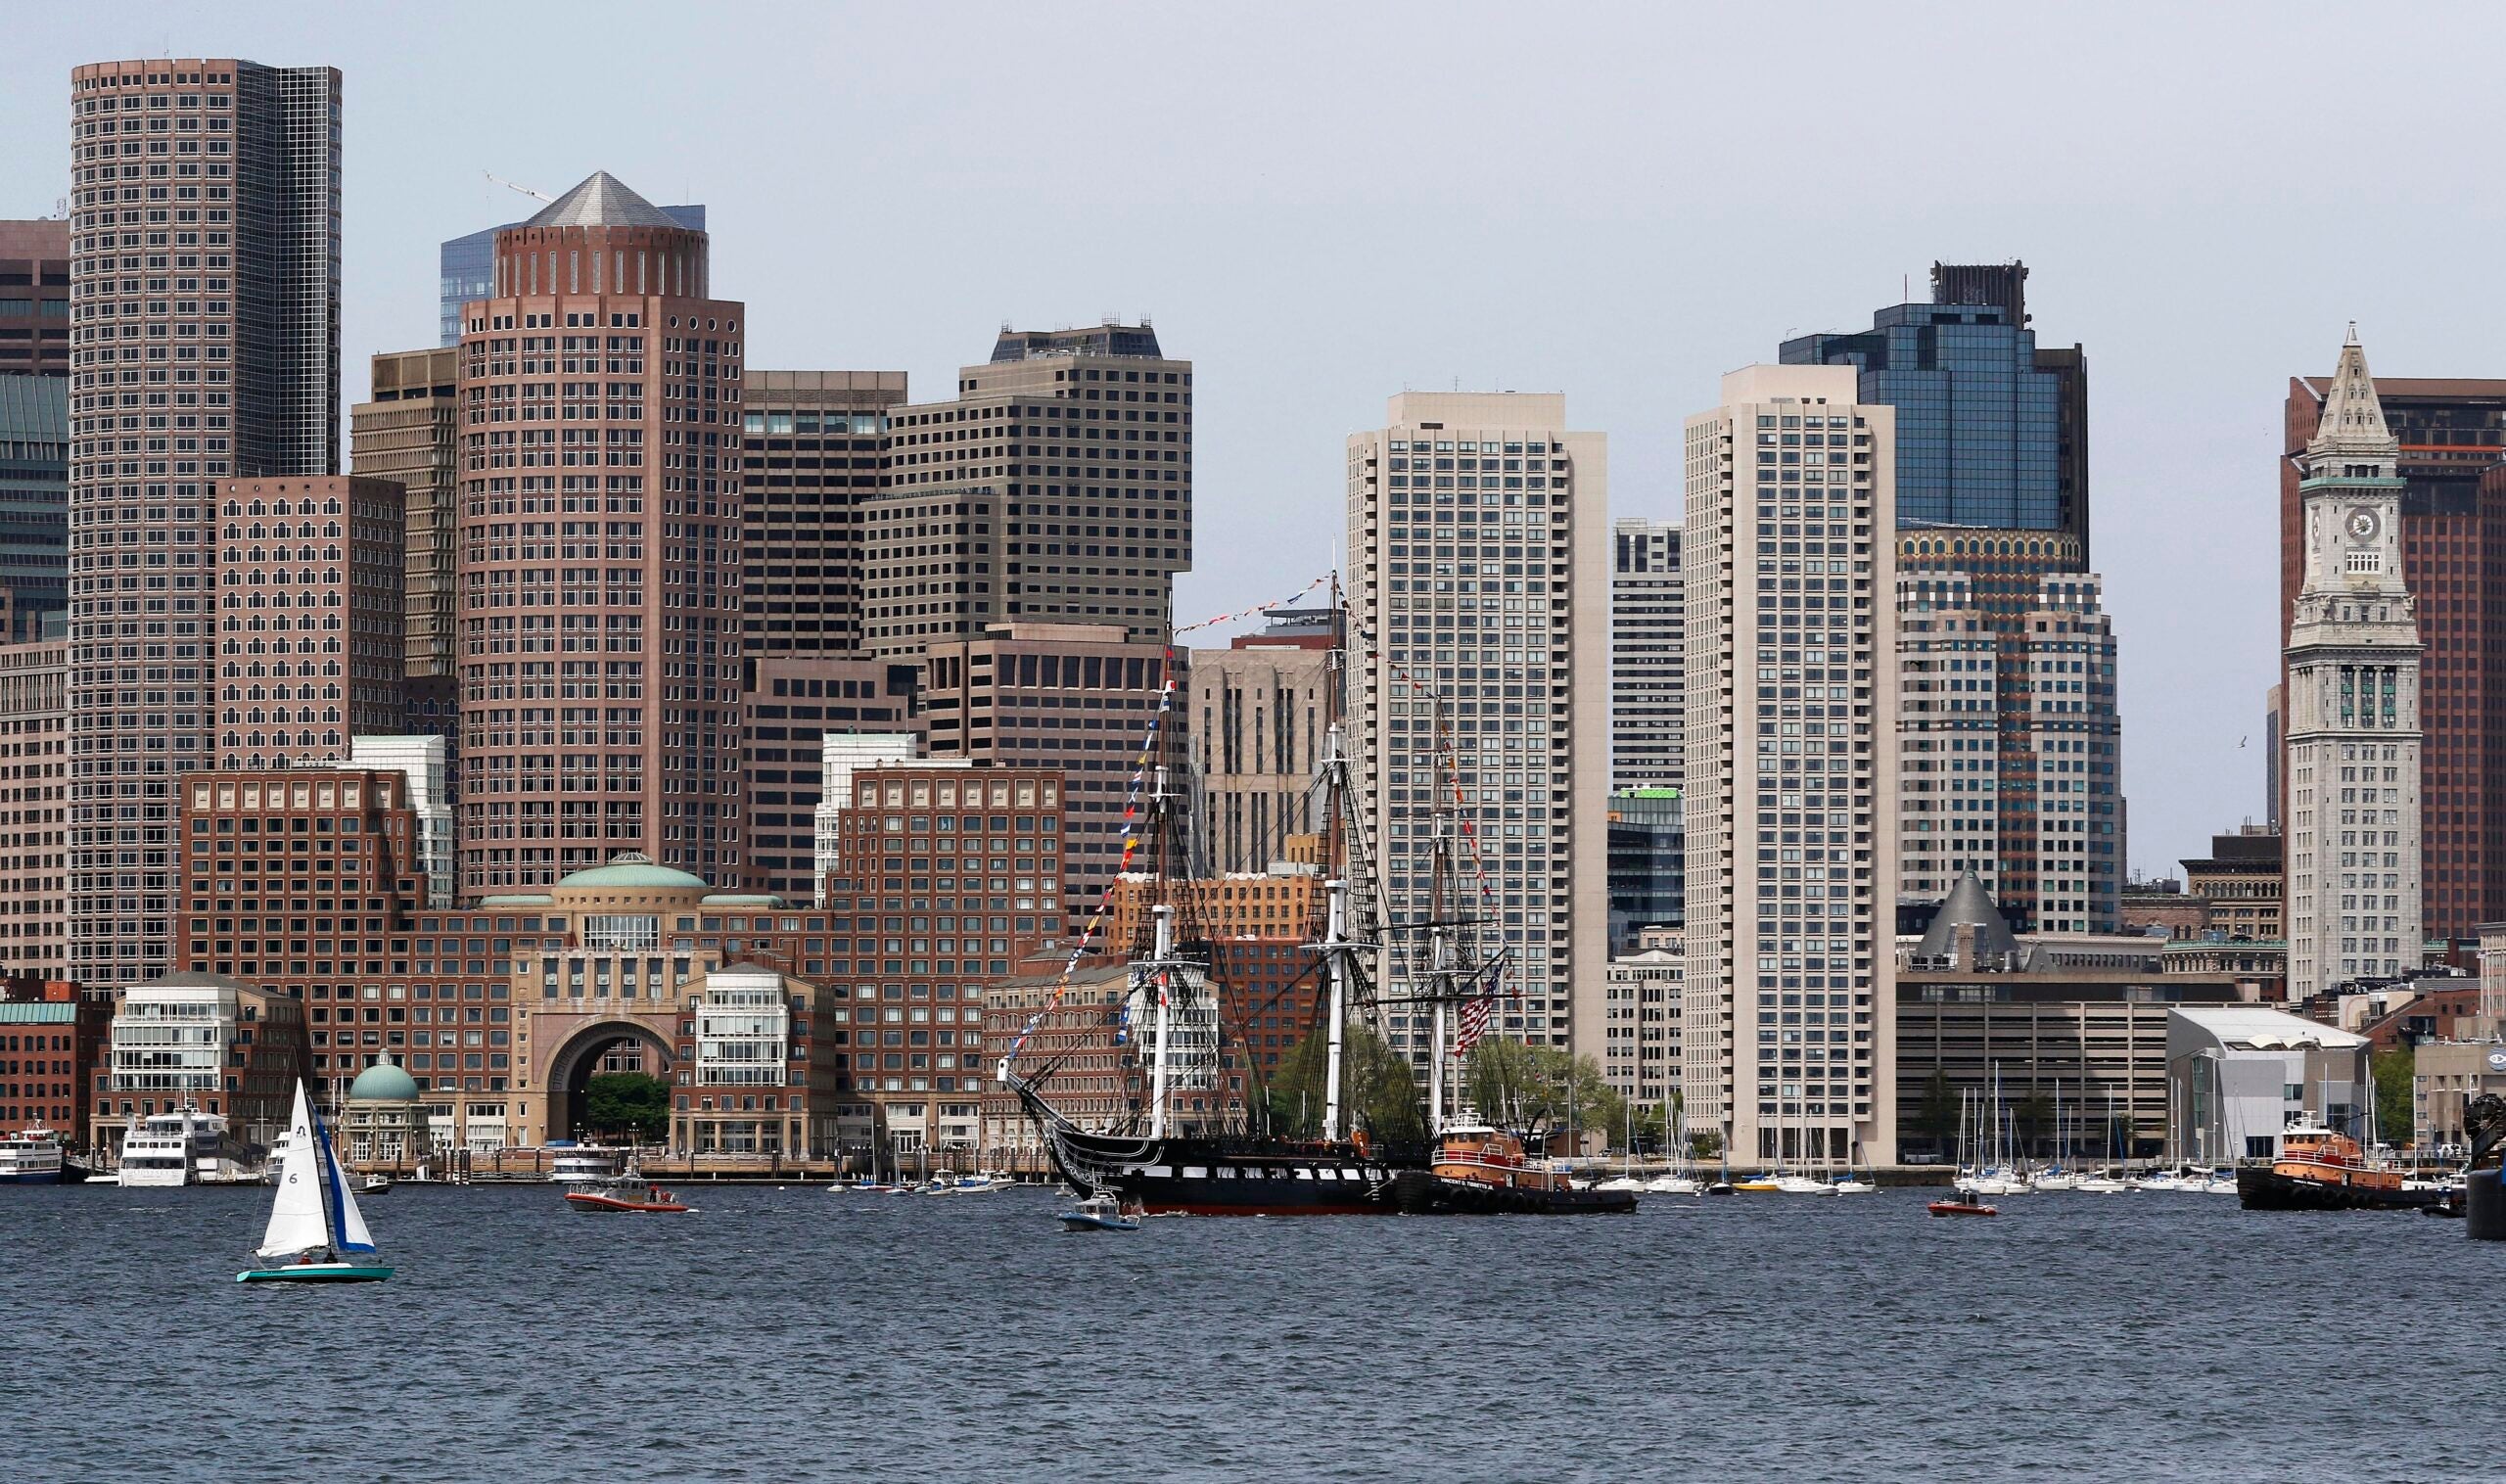 Boston's racial homeownership gap has widened. What will it take to fix it?